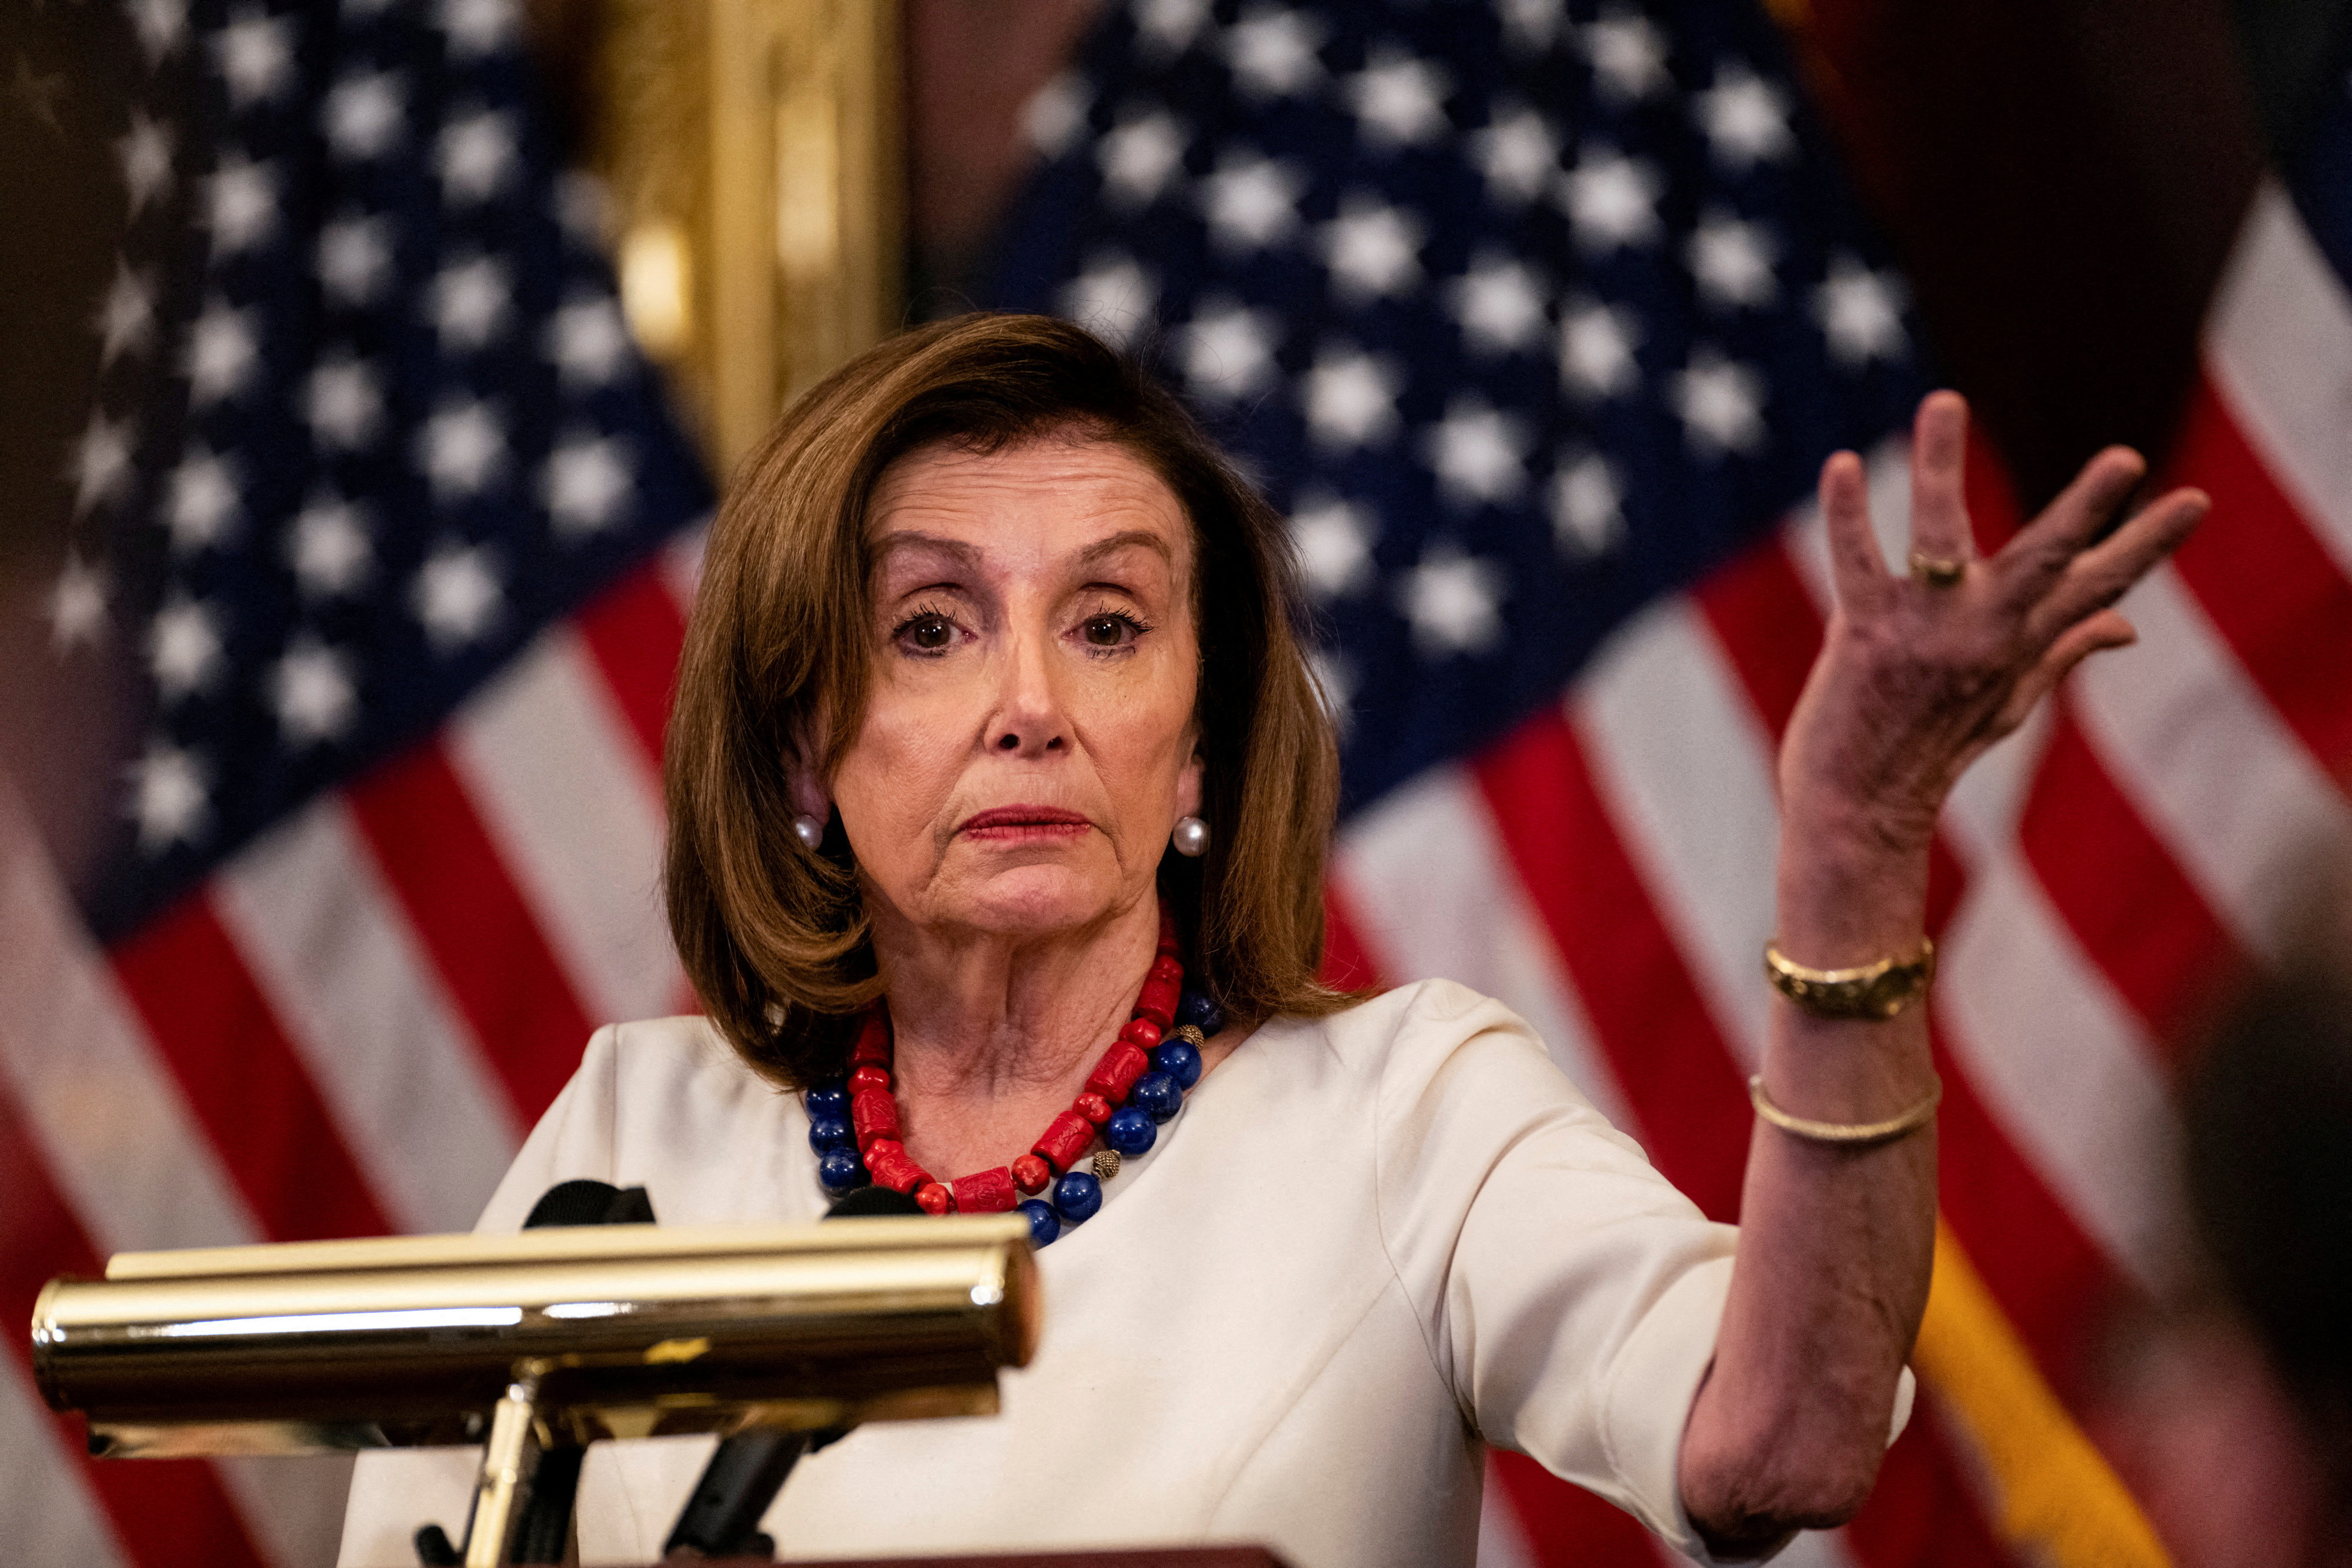 U.S. House Speaker Nancy Pelosi (D-CA) speaks during a news conference on Capitol Hill in Washington